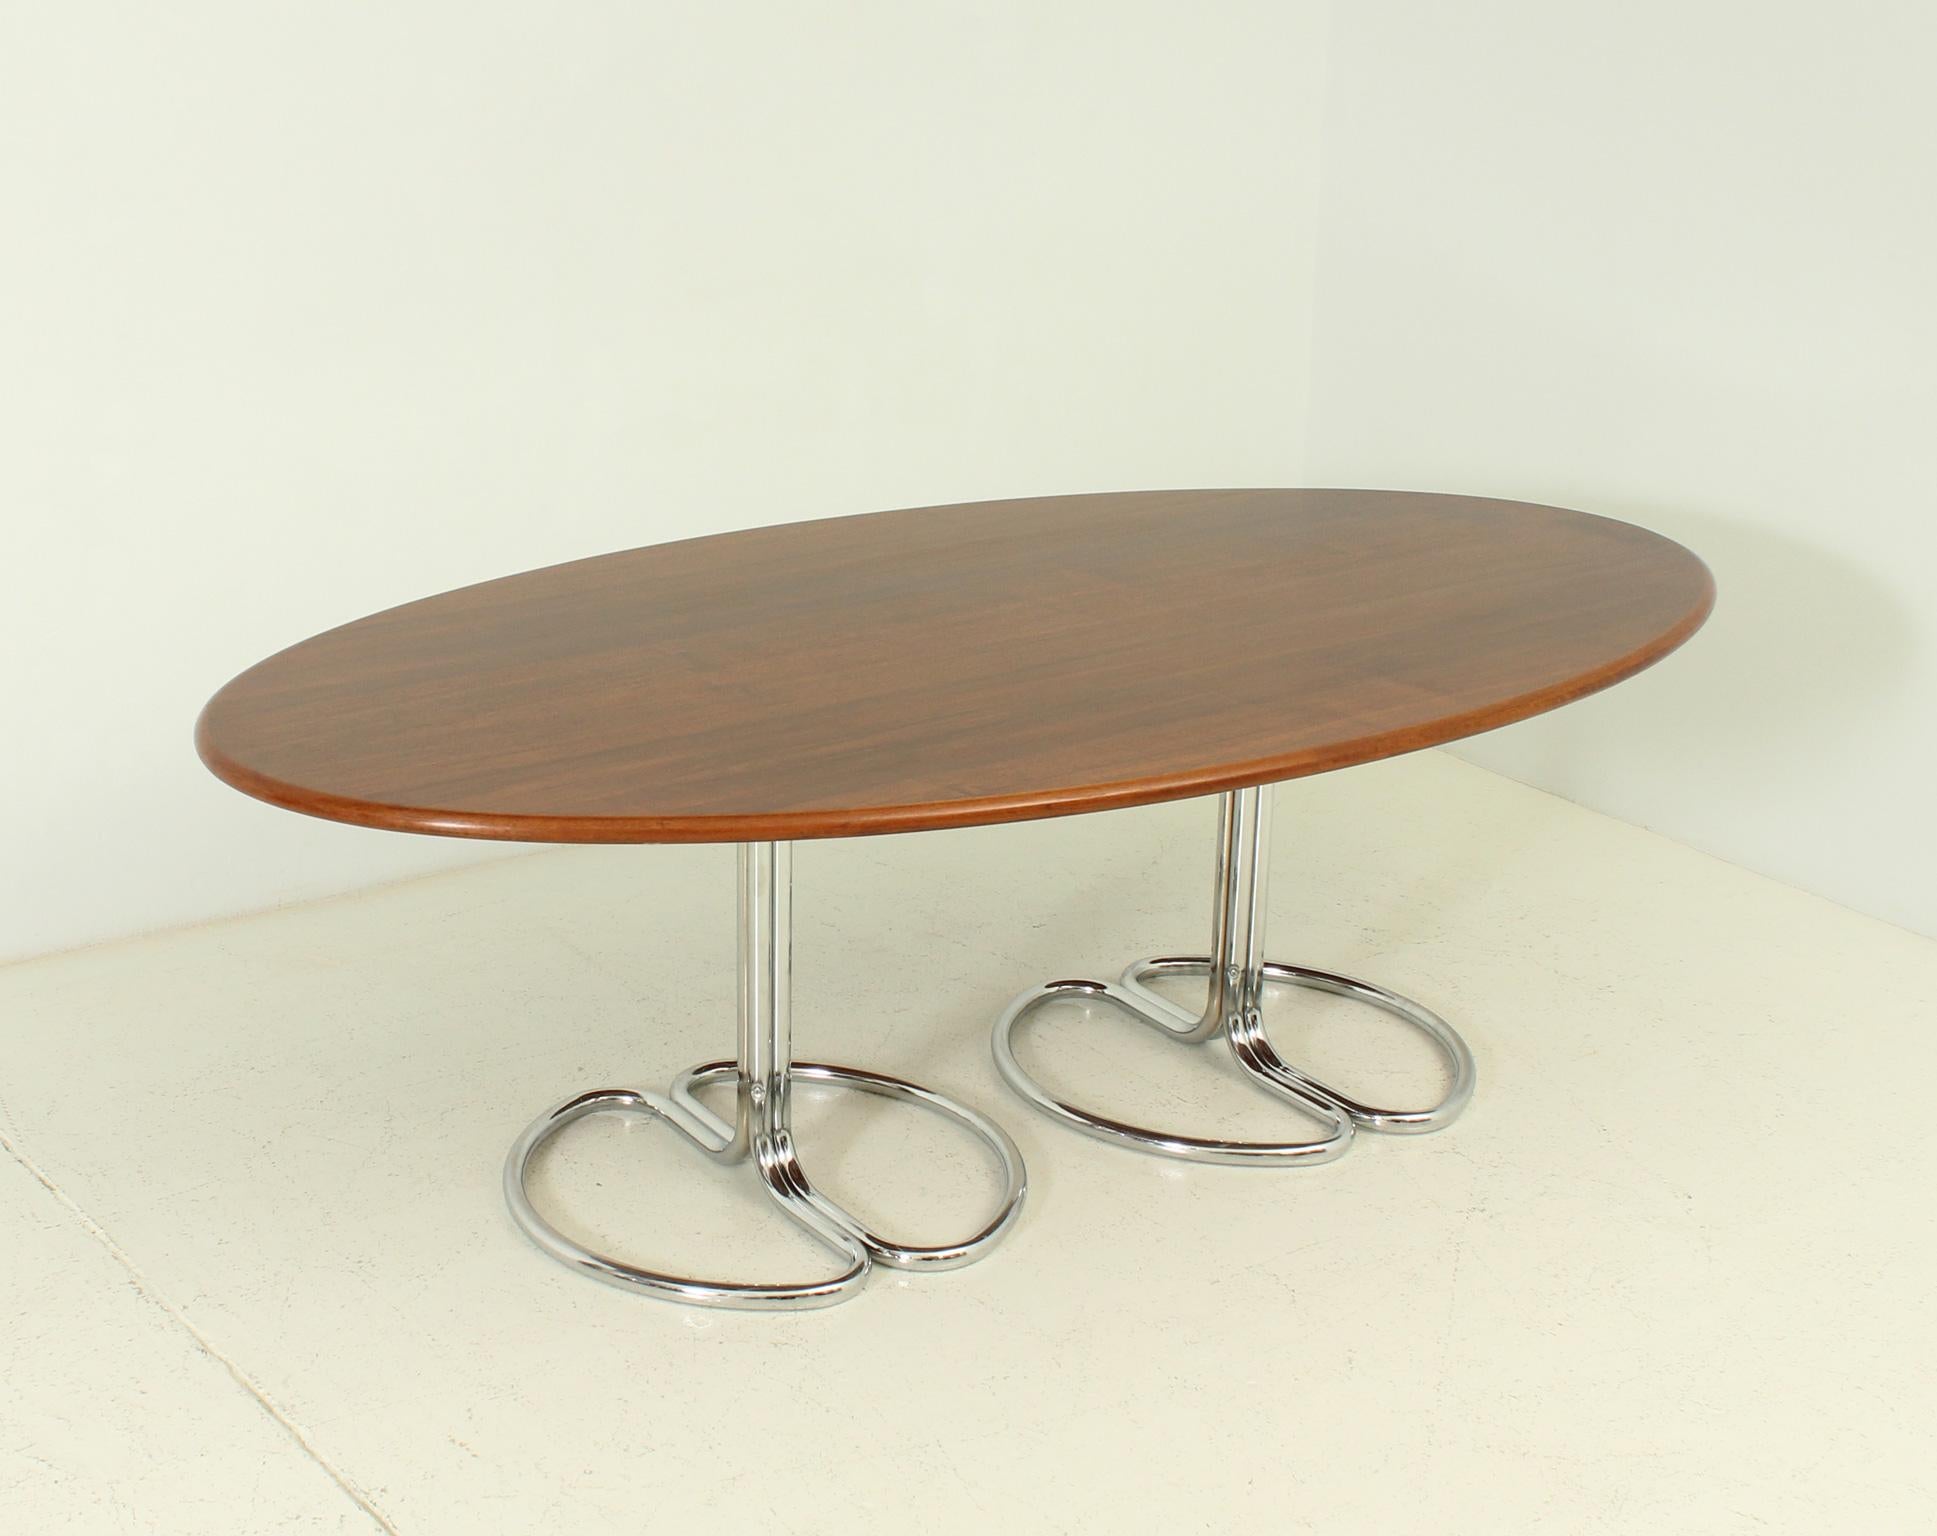 Maia dining table designed in 1969 by Giotto Stoppino for Bernini, Italy. Rare oval model with double pedestal in chromed metal and a walnut wood table top.